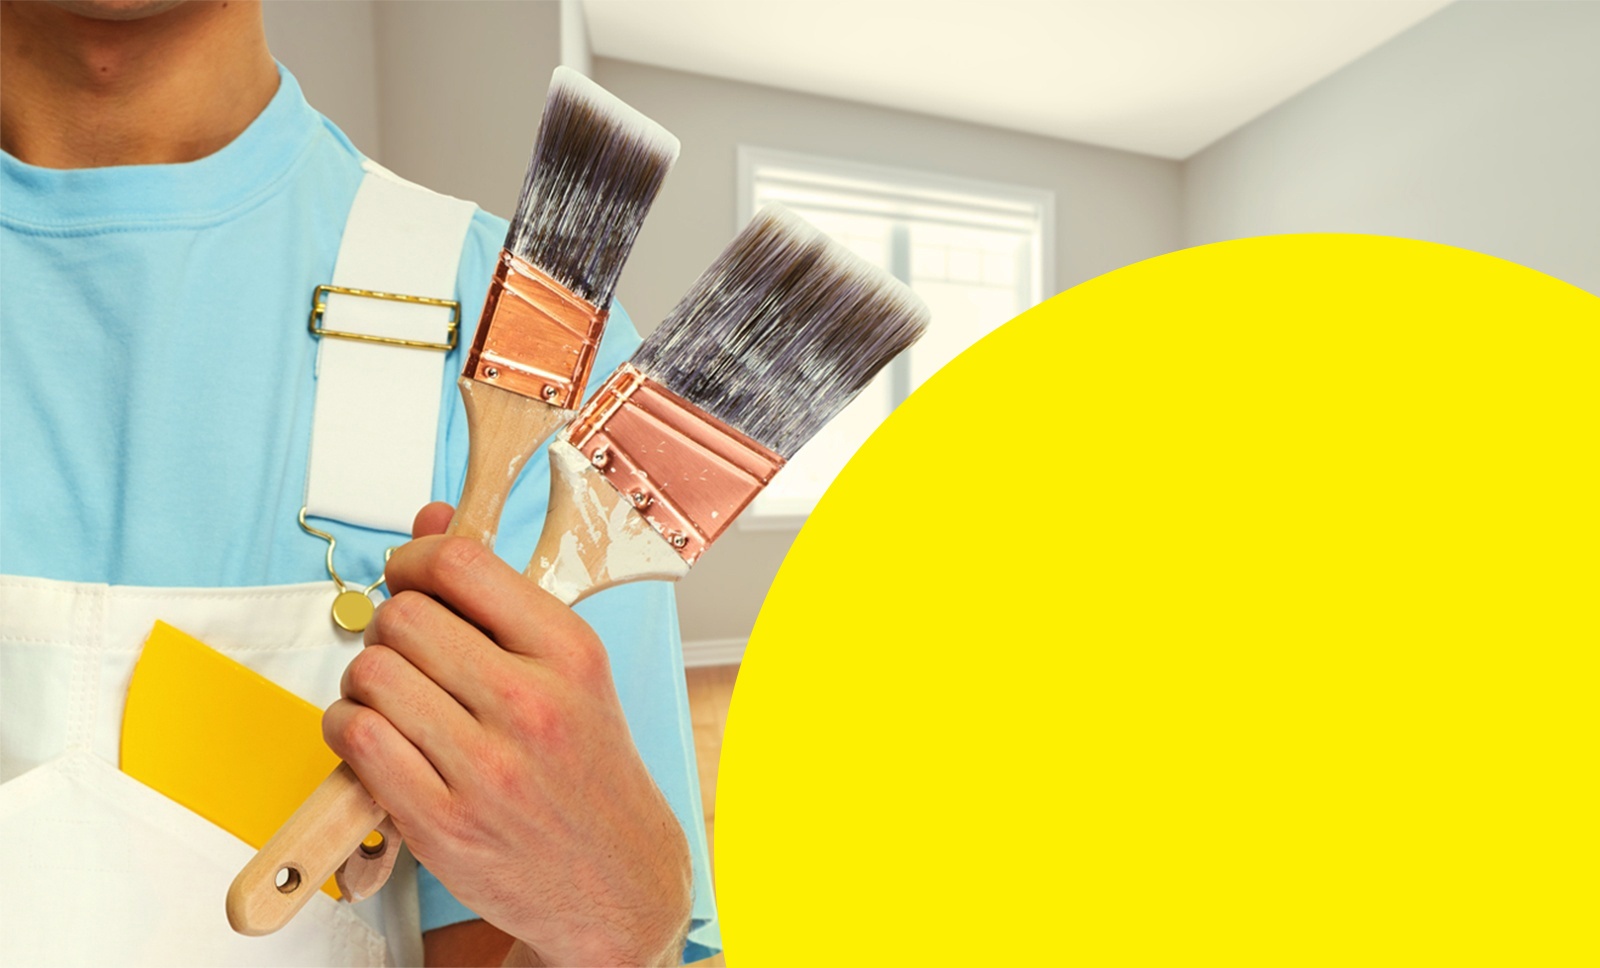 Painting, Renovations services and general Repairs by Best Handy Hubby Renovation and Painting Services in Coquitlam